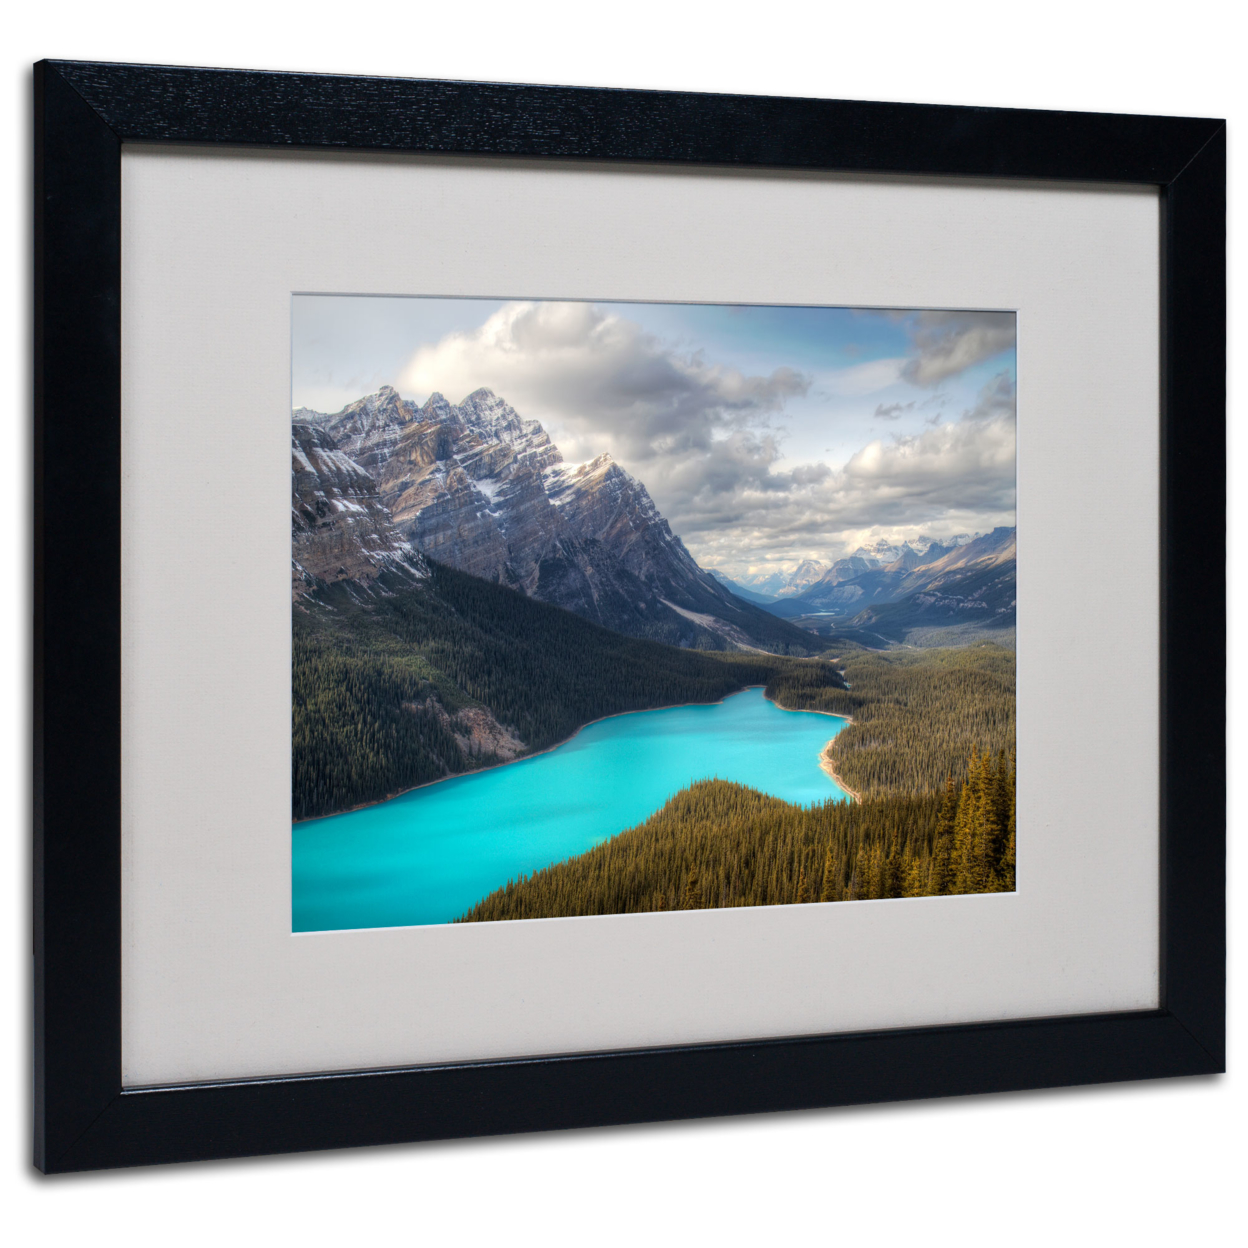 Pierre Leclerc 'Peyto Lake' Black Wooden Framed Art 18 X 22 Inches